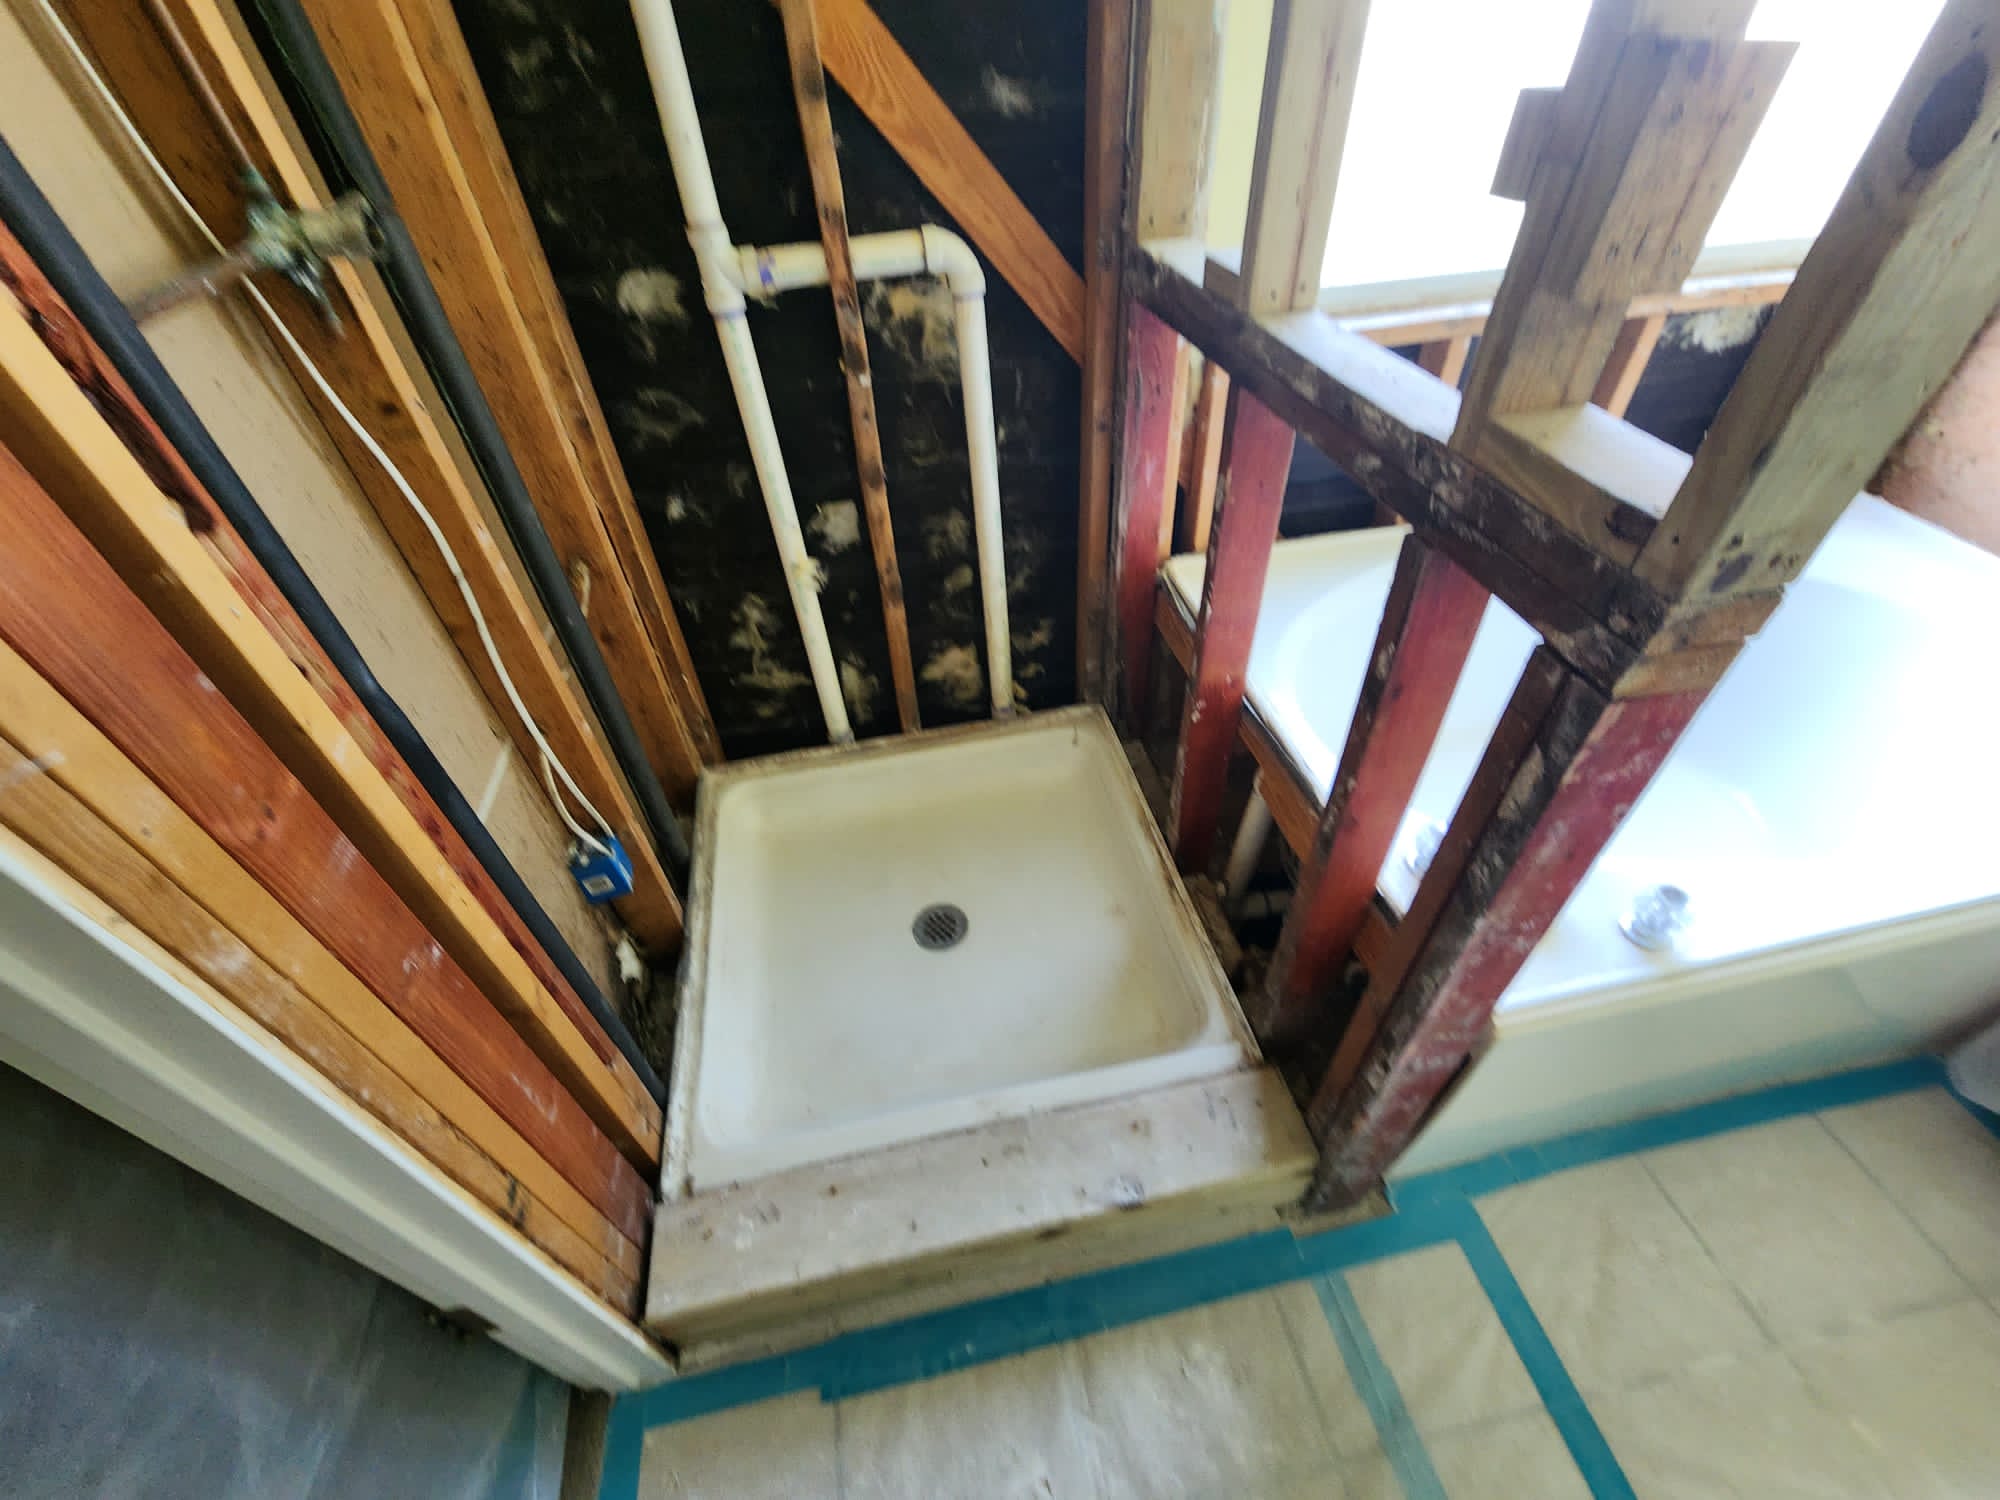 Restoring Houston, TX home after an upstairs bathroom water main leak